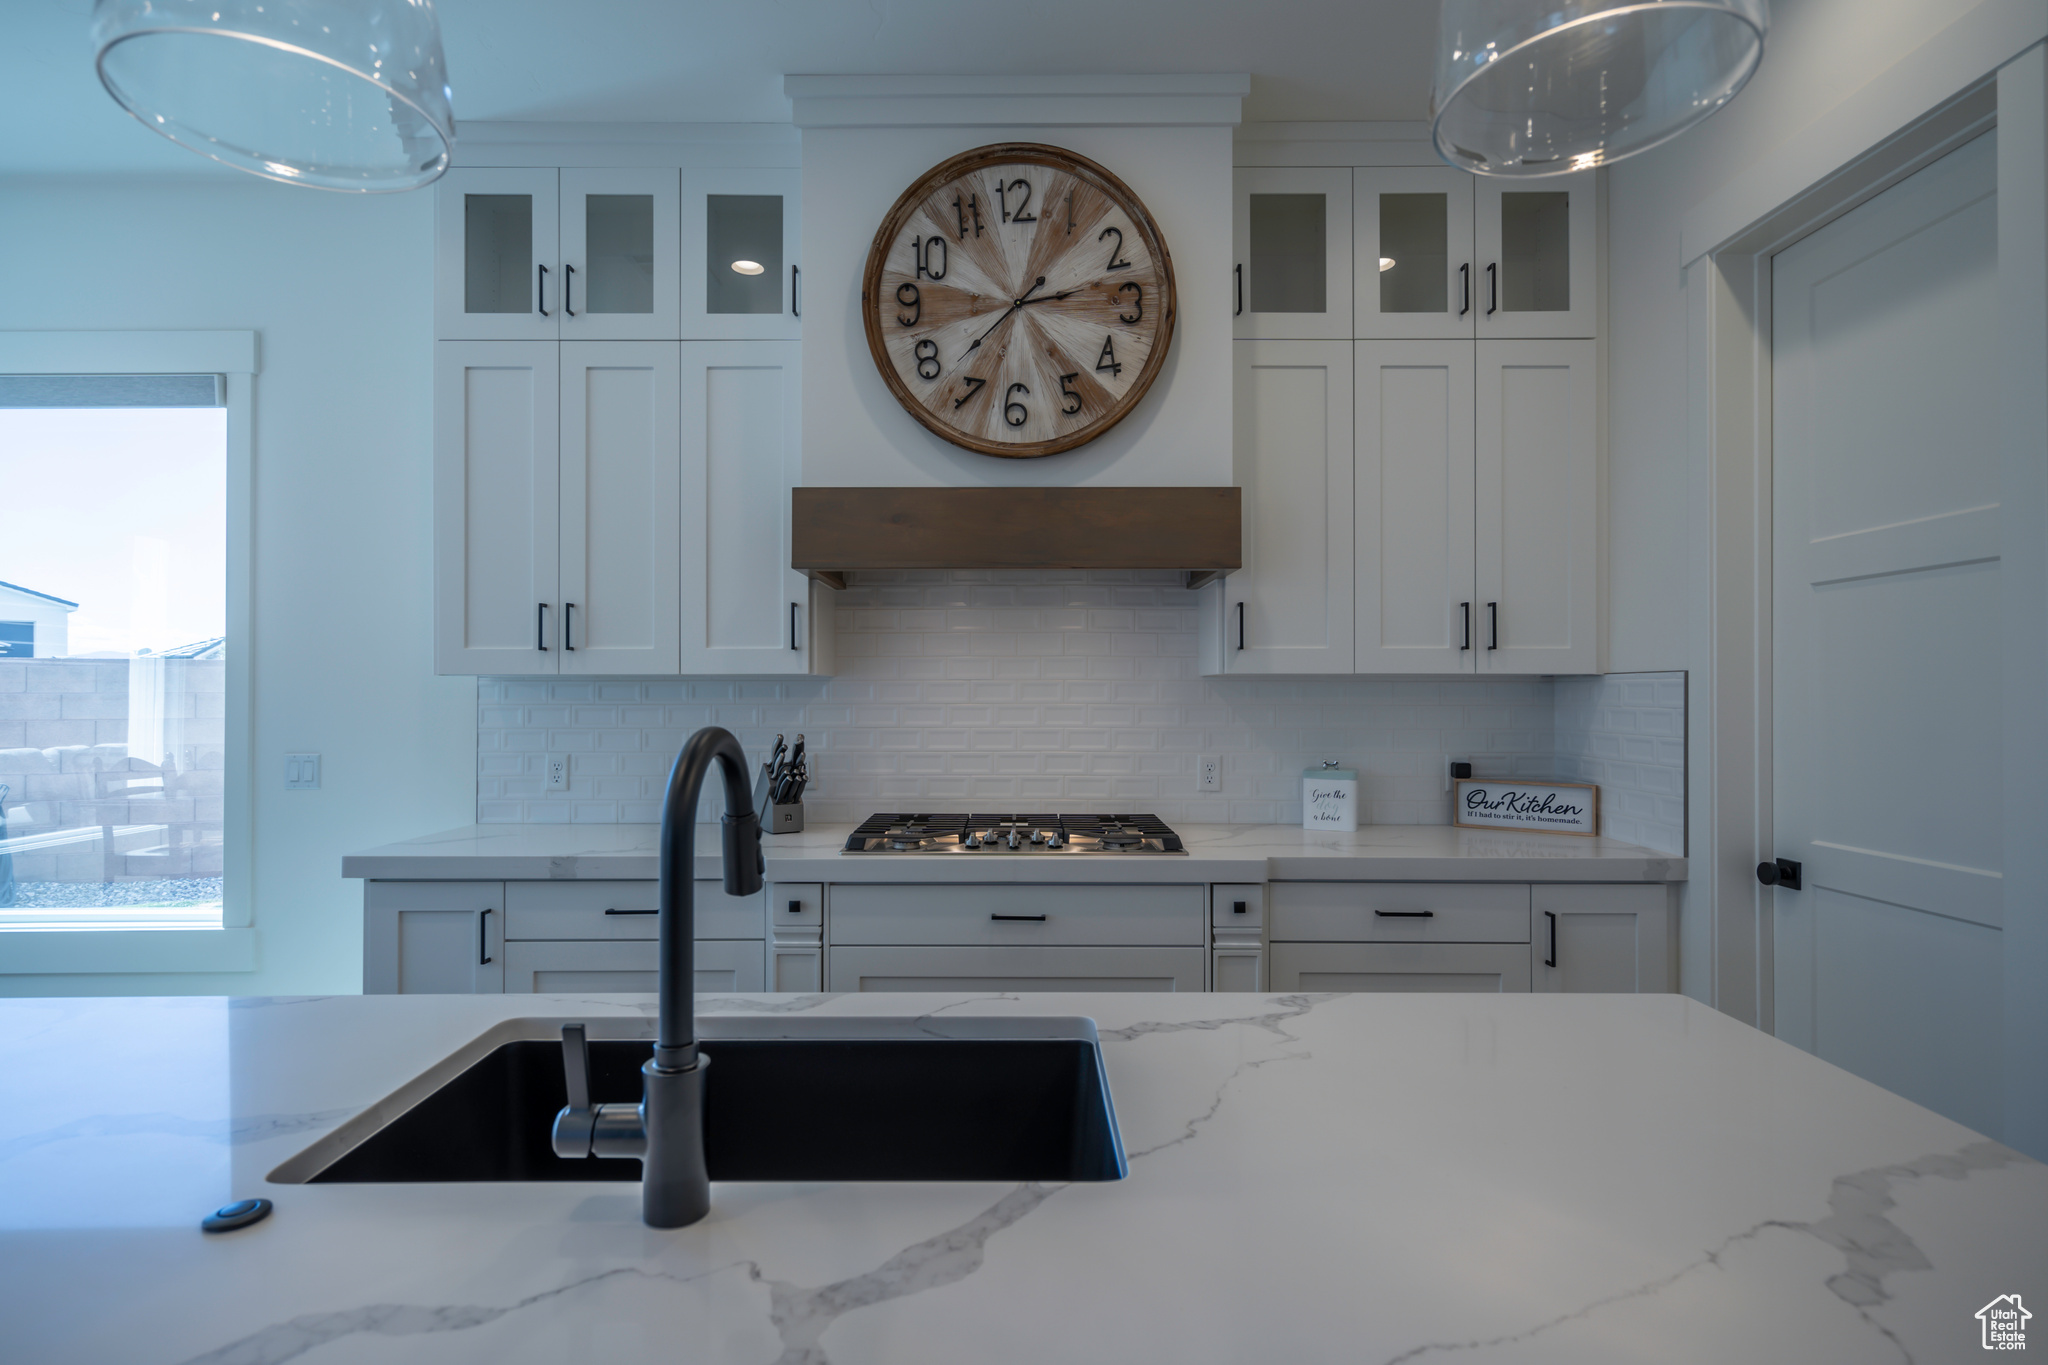 Kitchen featuring light stone counters, stainless steel gas stovetop, white cabinets, sink, and tasteful backsplash